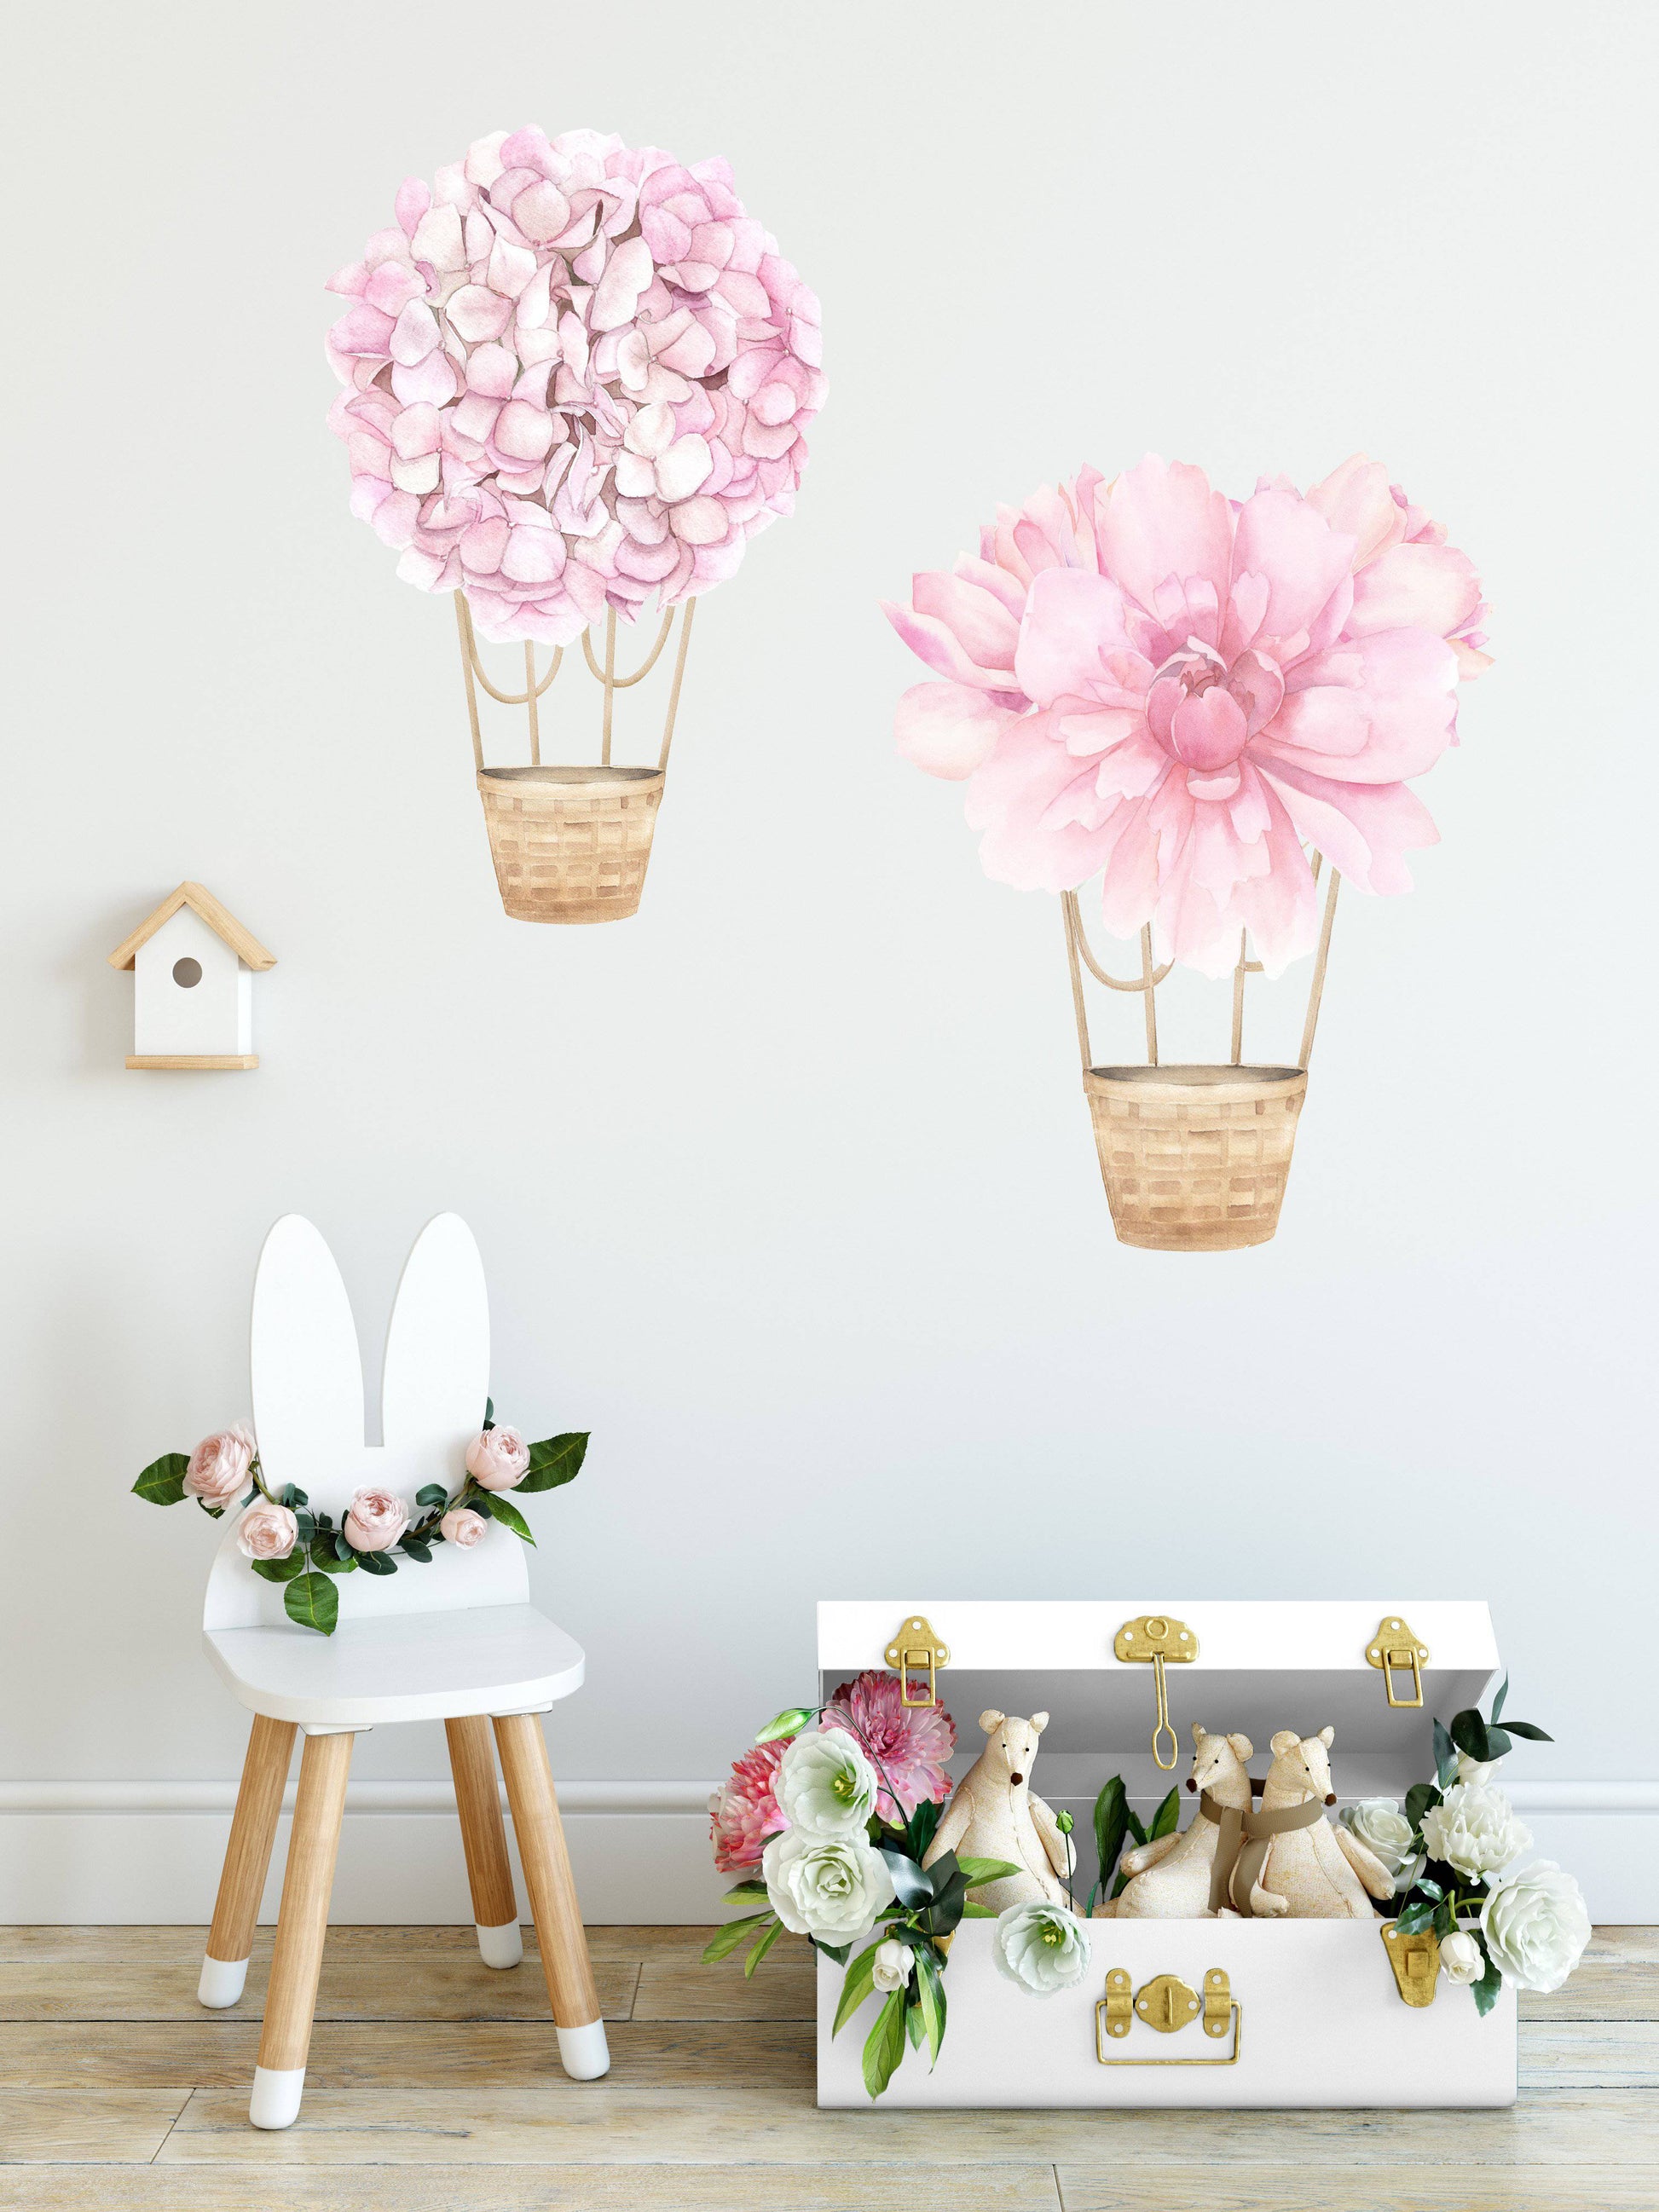 Floral Hot Air Balloons (Pink) - Wall Decals - Fable and Fawn 